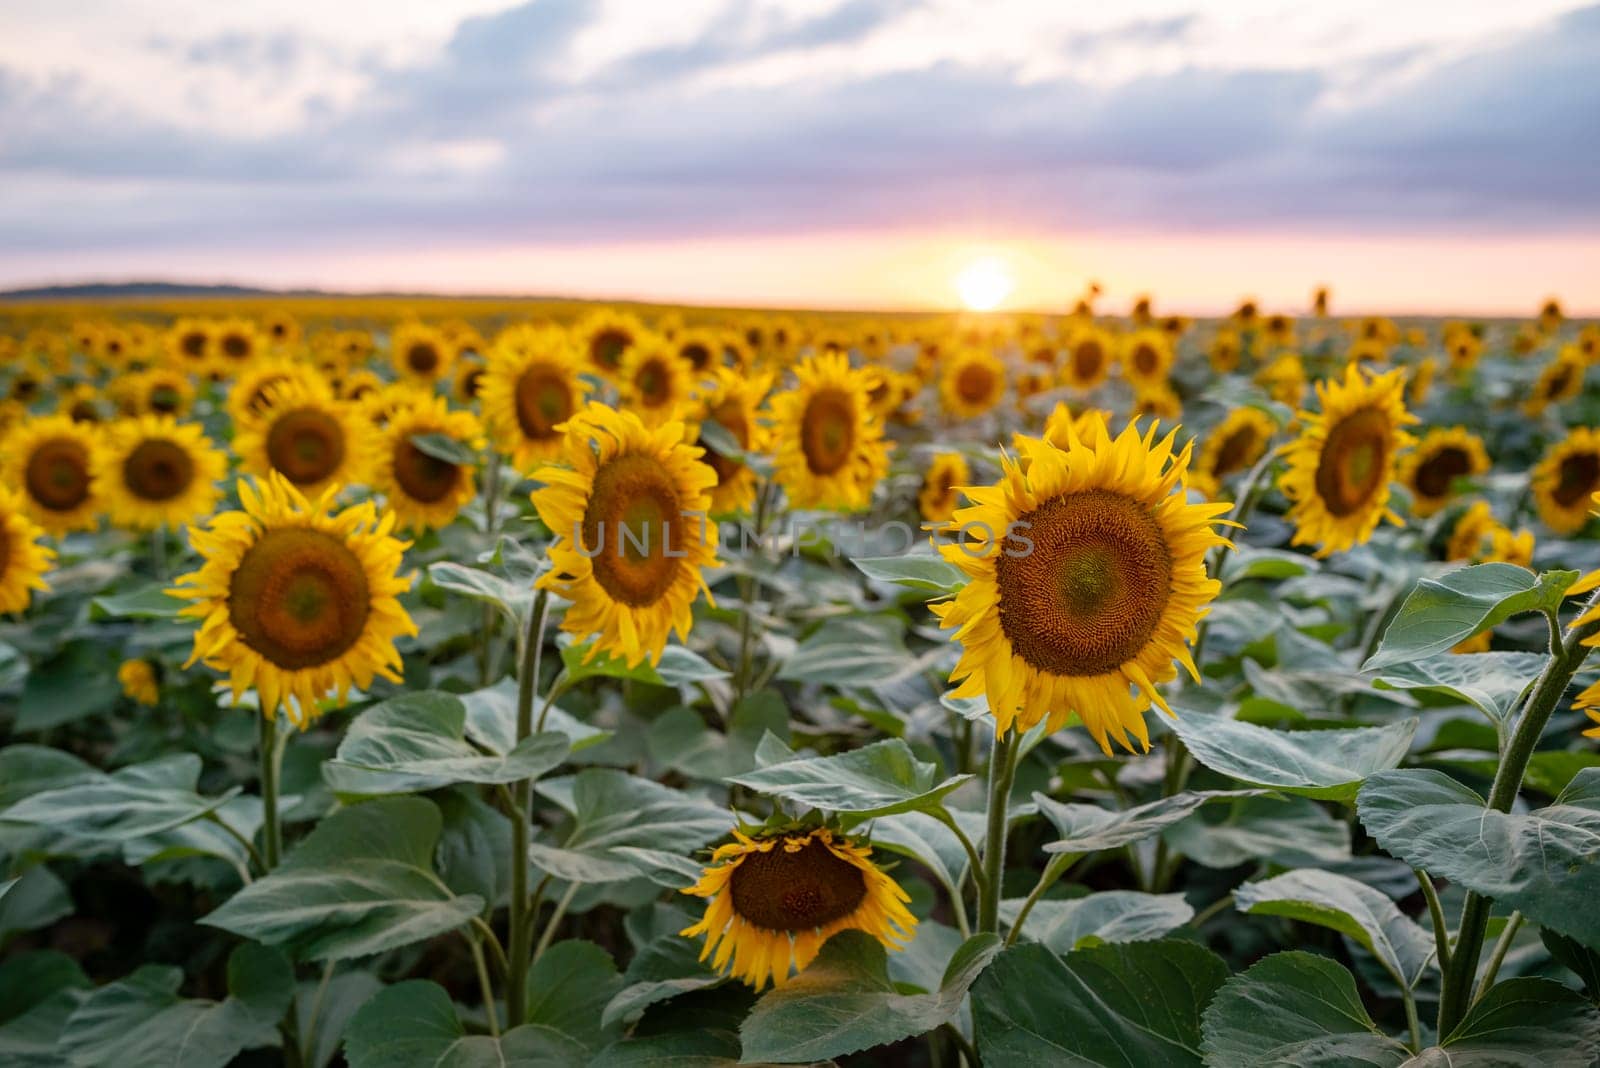 Landscape of blooming sunflowers at sunset by VitaliiPetrushenko